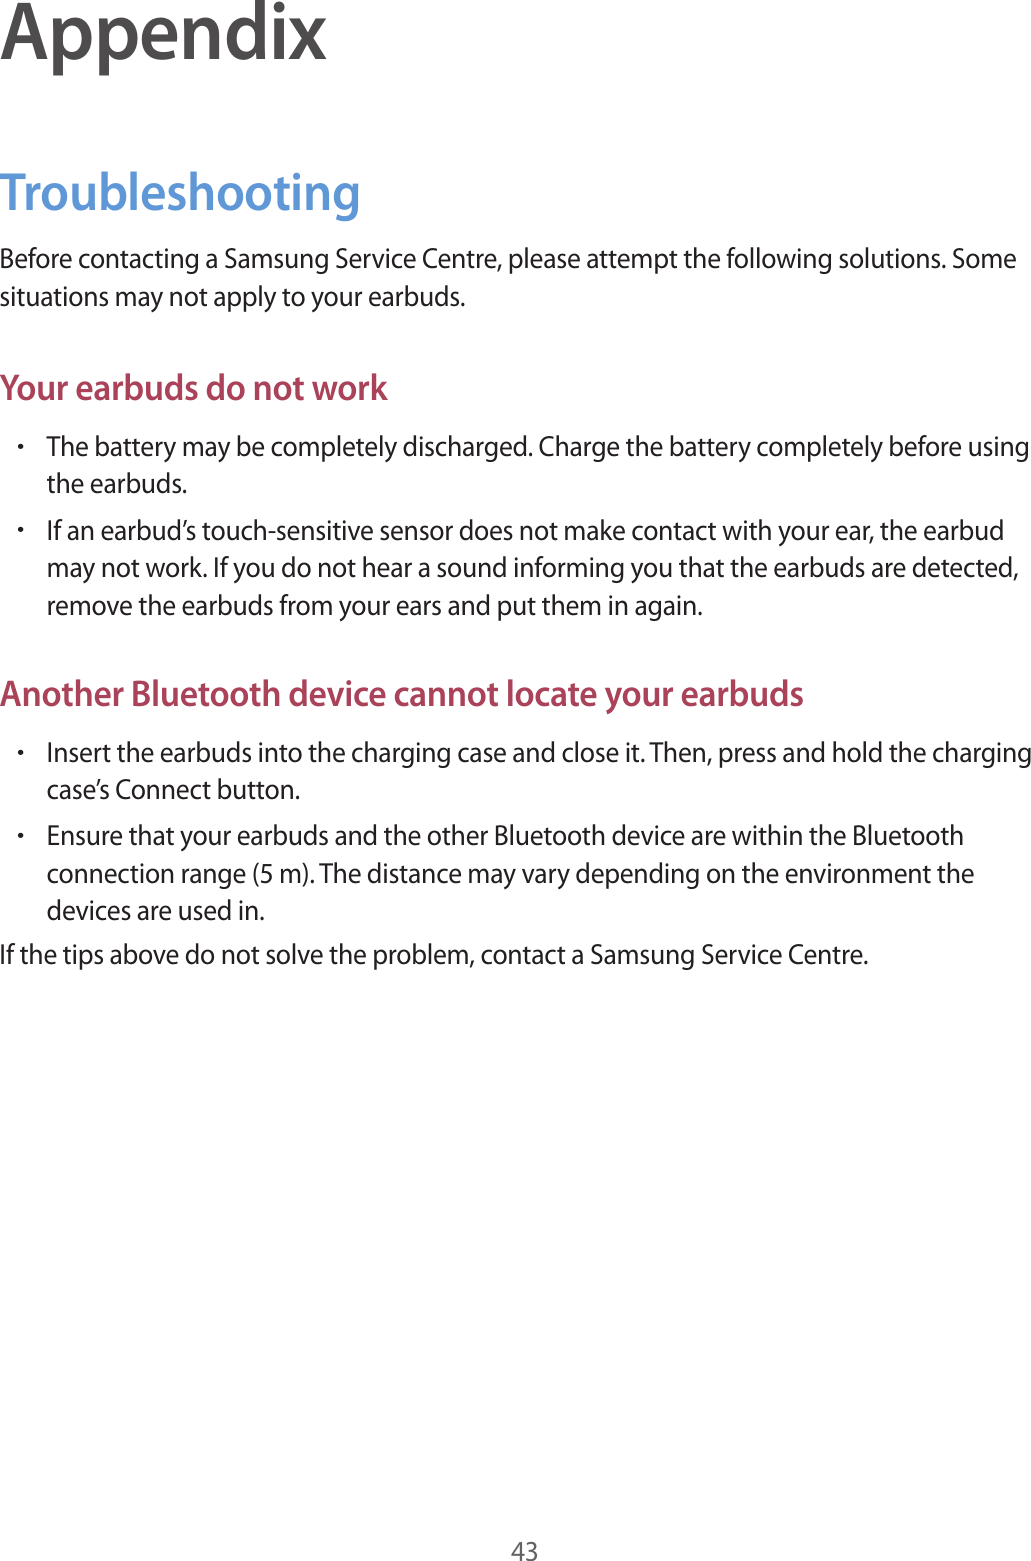 43AppendixTroubleshootingBefore contacting a Samsung Service Centre, please attempt the following solutions. Some situations may not apply to your earbuds.Your earbuds do not work•The battery may be completely discharged. Charge the battery completely before using the earbuds.•If an earbud’s touch-sensitive sensor does not make contact with your ear, the earbud may not work. If you do not hear a sound informing you that the earbuds are detected, remove the earbuds from your ears and put them in again.Another Bluetooth device cannot locate your earbuds•Insert the earbuds into the charging case and close it. Then, press and hold the charging case’s Connect button.•Ensure that your earbuds and the other Bluetooth device are within the Bluetooth connection range (5 m). The distance may vary depending on the environment the devices are used in.If the tips above do not solve the problem, contact a Samsung Service Centre.